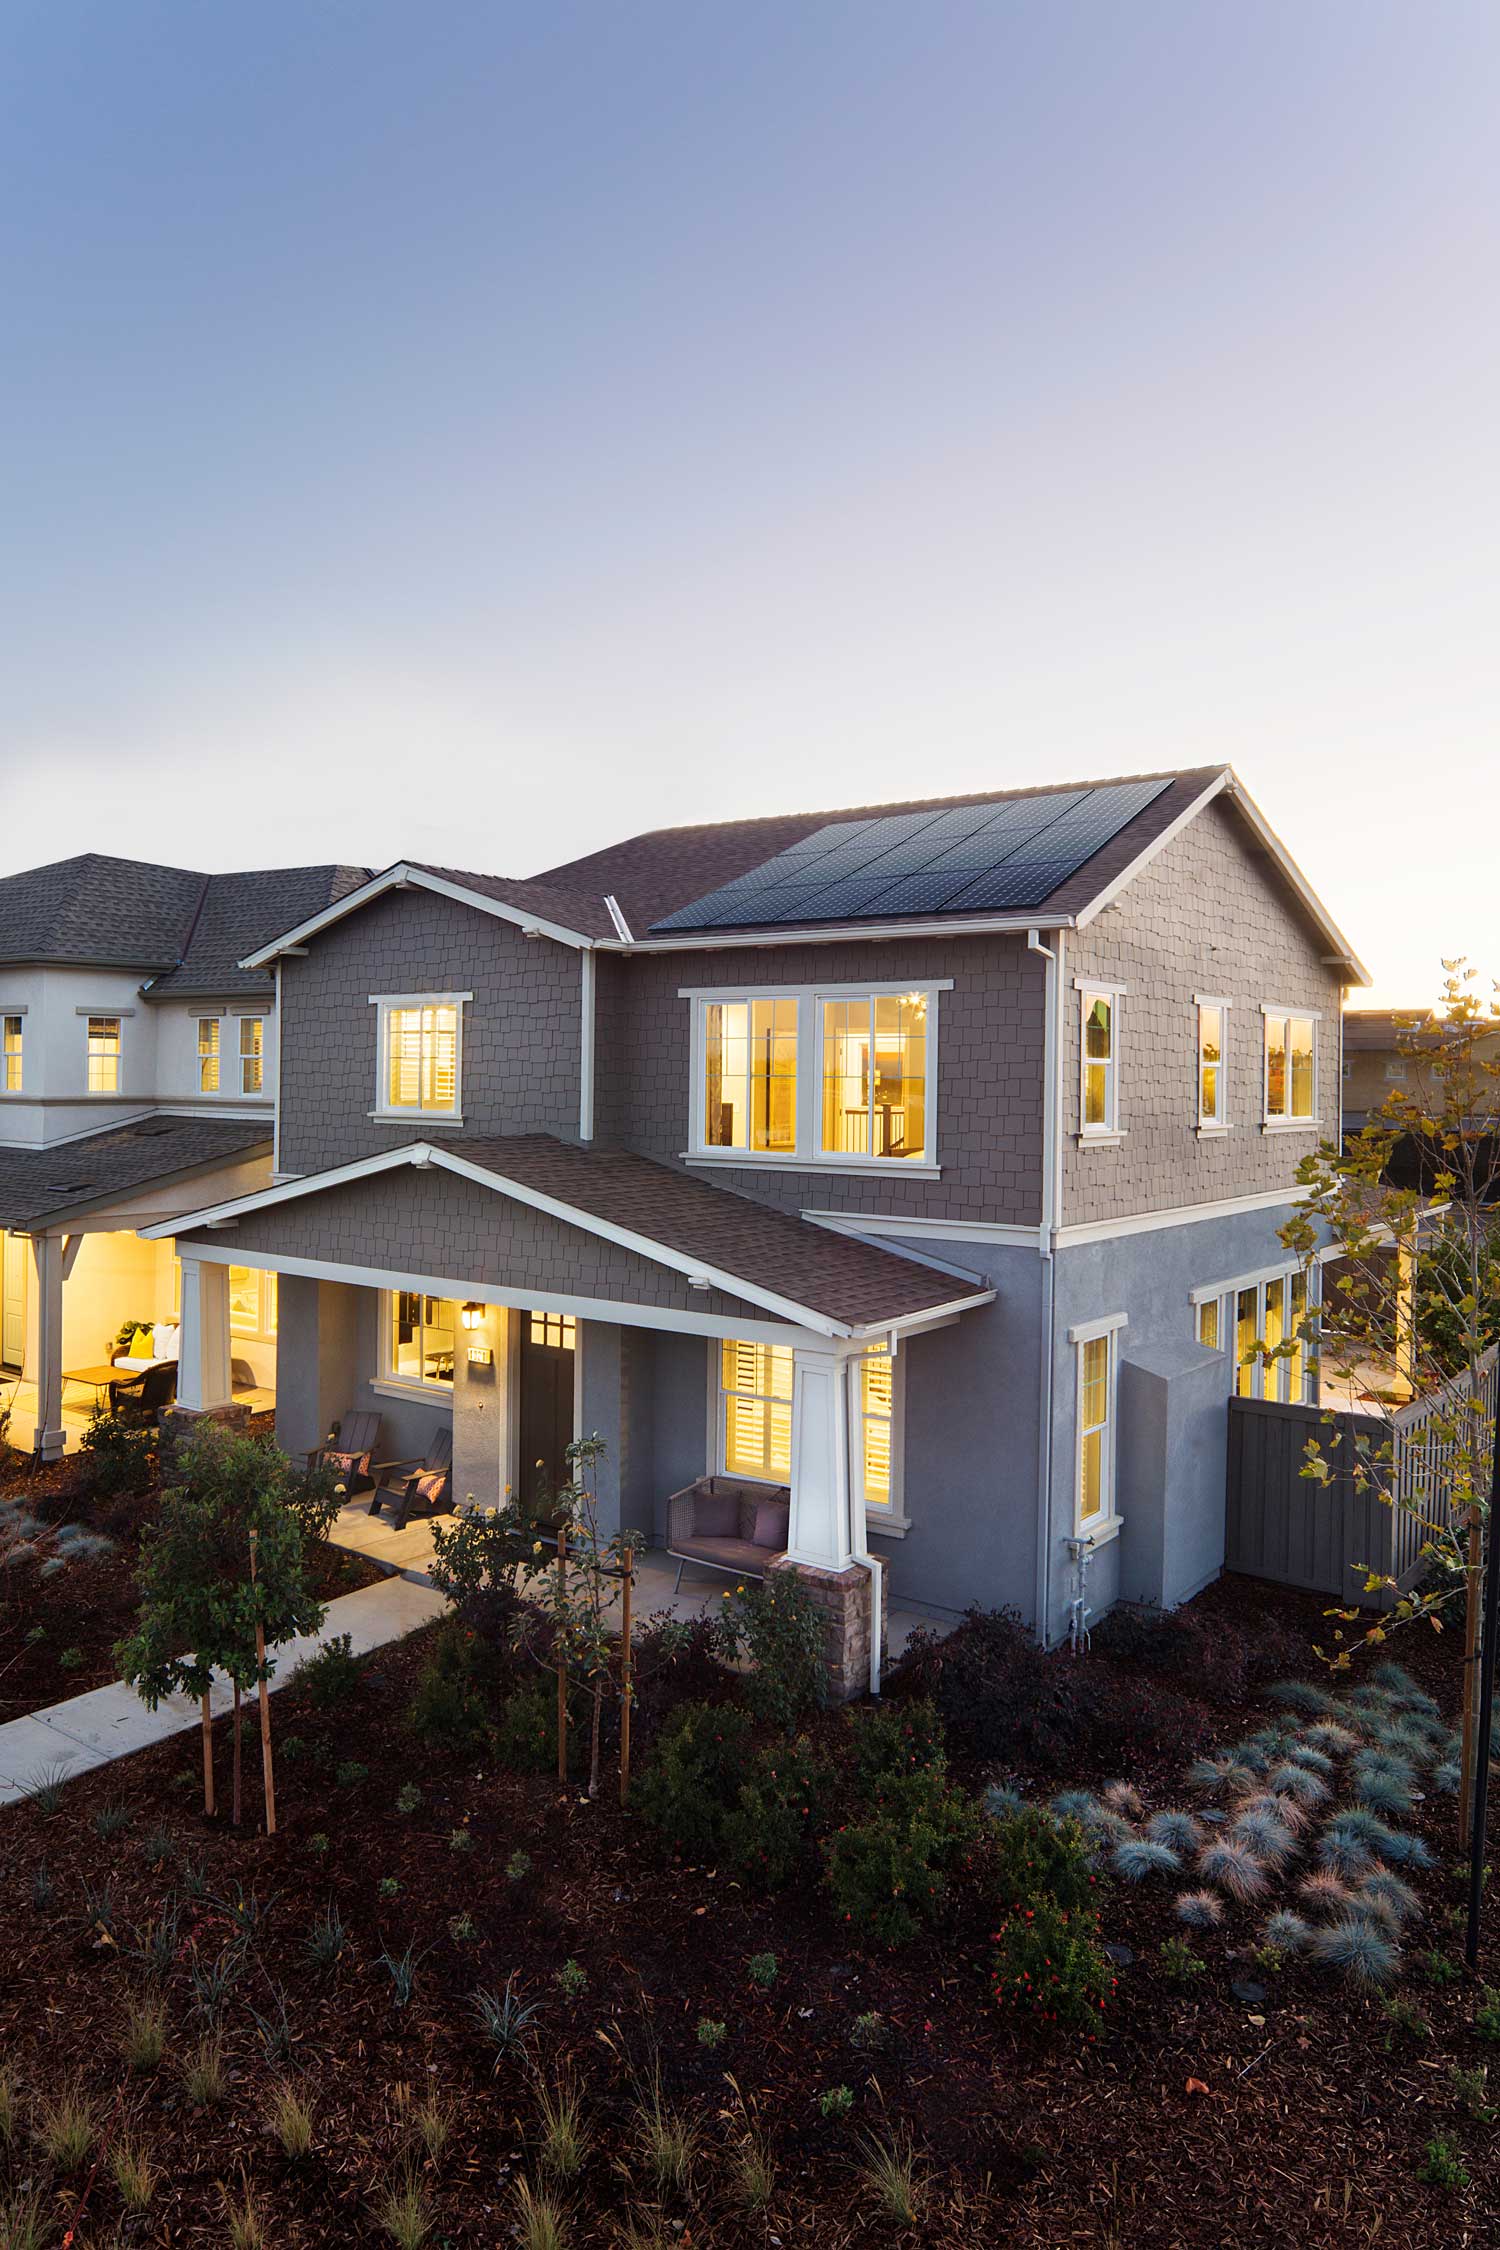 A grey house at dusk with lighting generating power from their solar panels, SC & GA solar company.